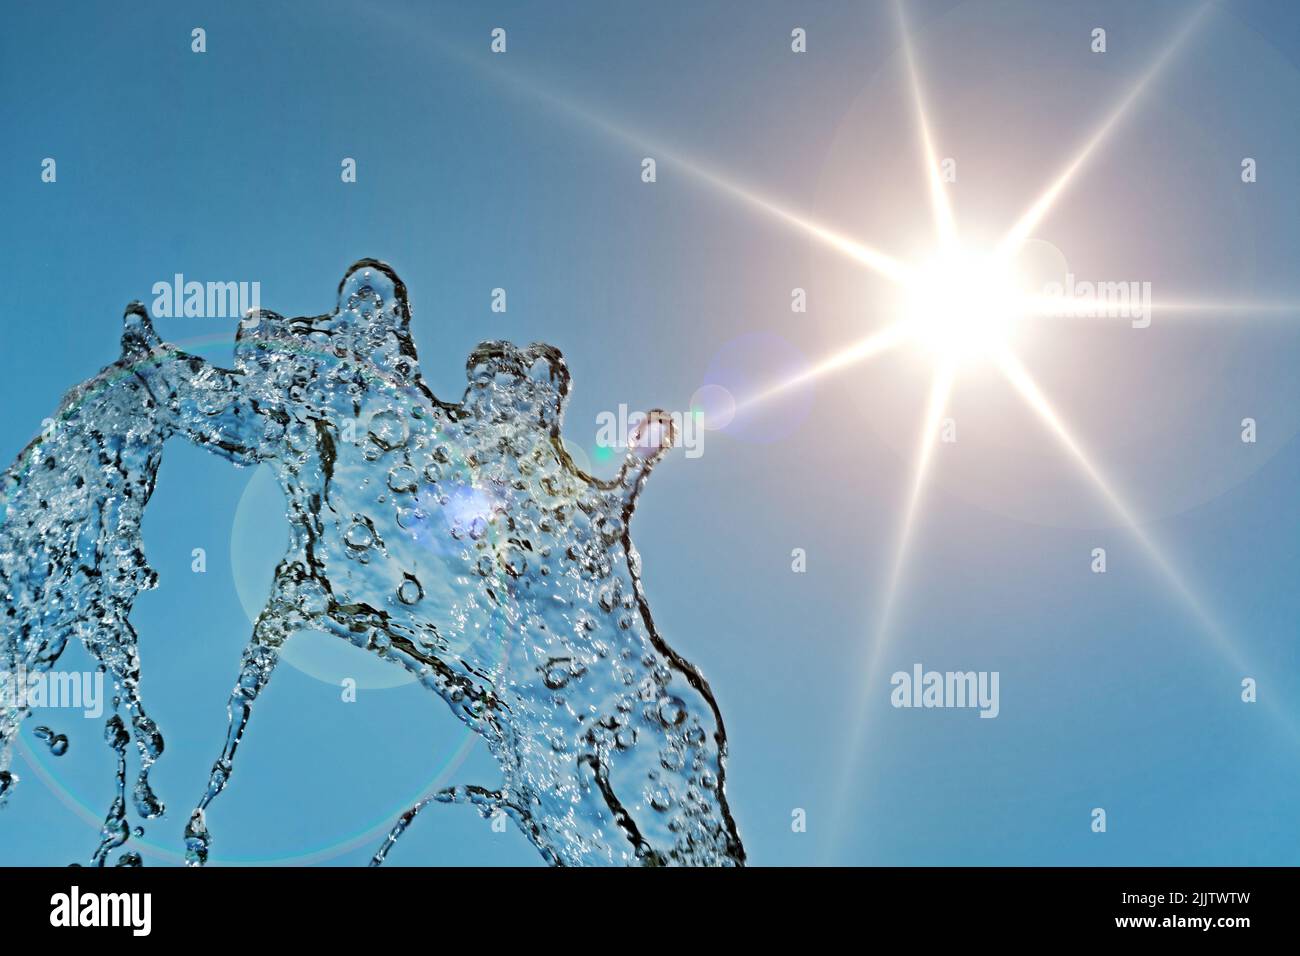 Jet of water in front of blue sky with sun Stock Photo